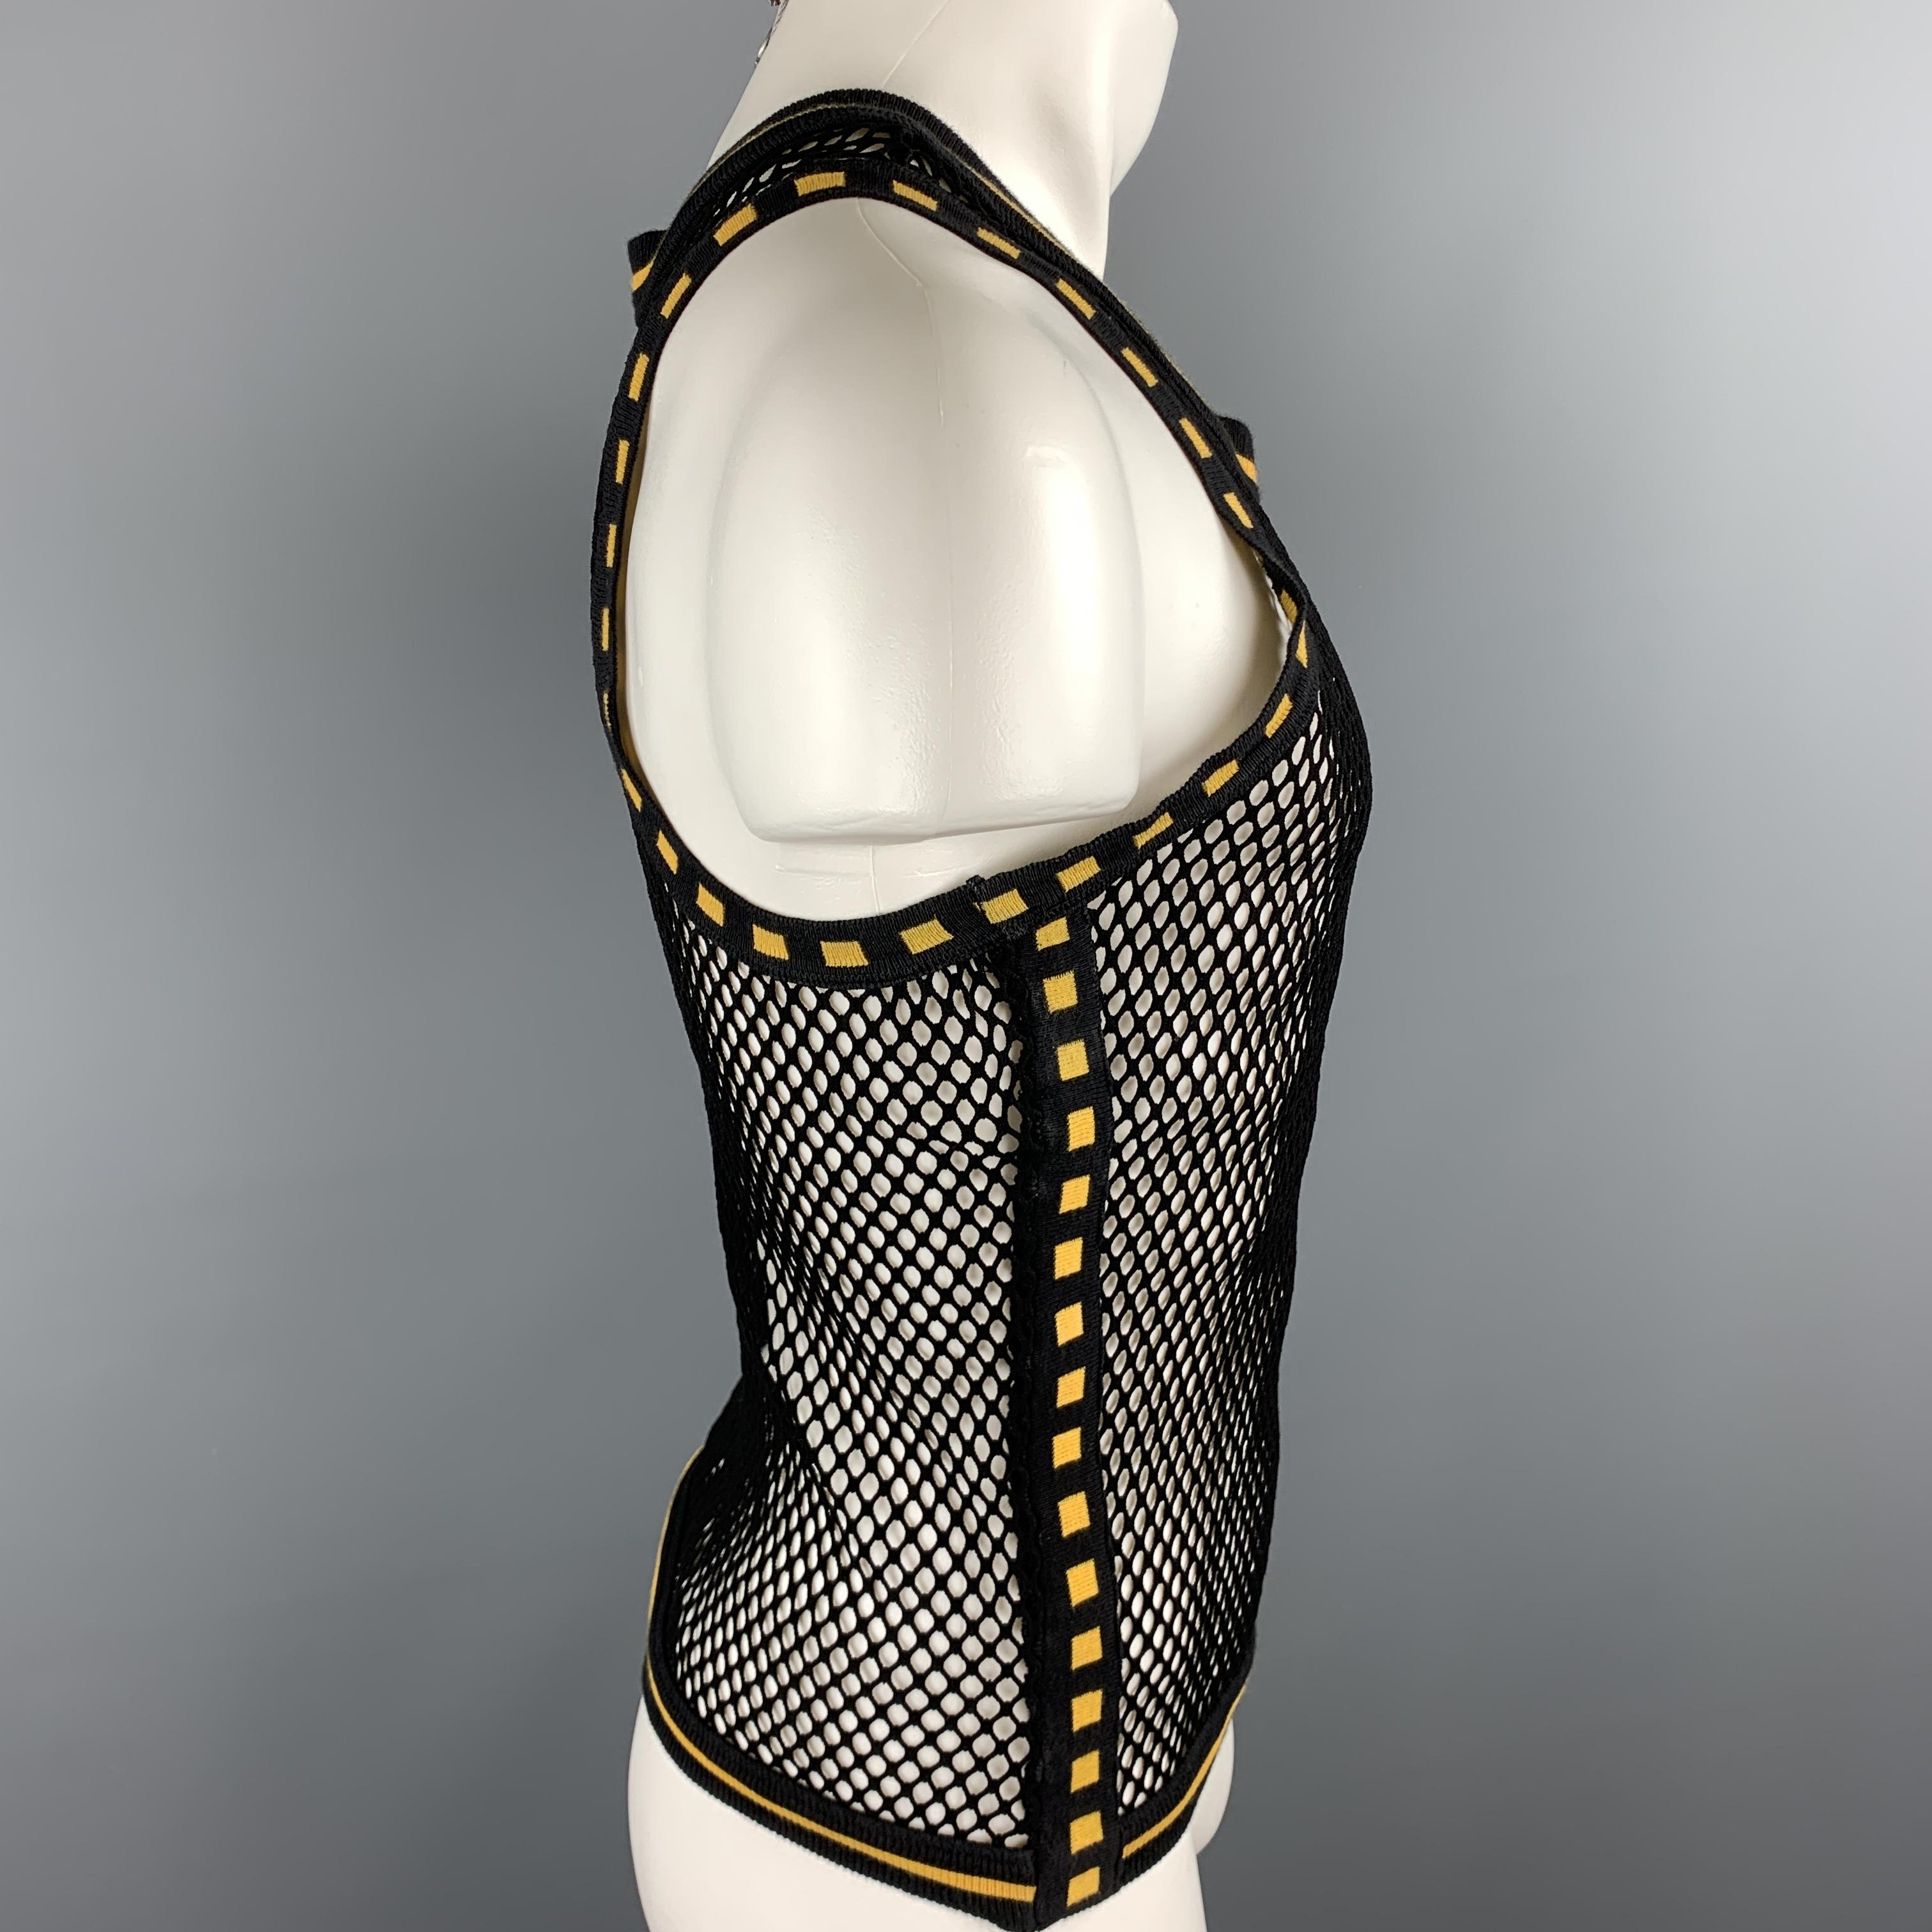 Vintage JEAN PAUL GAULTIER tank top comes in a black mesh with a yellow trim. Made in Italy.

Very Good Pre-Owned Condition.
Marked: IT 48

Measurements:

Shoulder: 12.5 in. 
Chest: 38 in. 
Length: 20.5 in. 

SKU: 104084